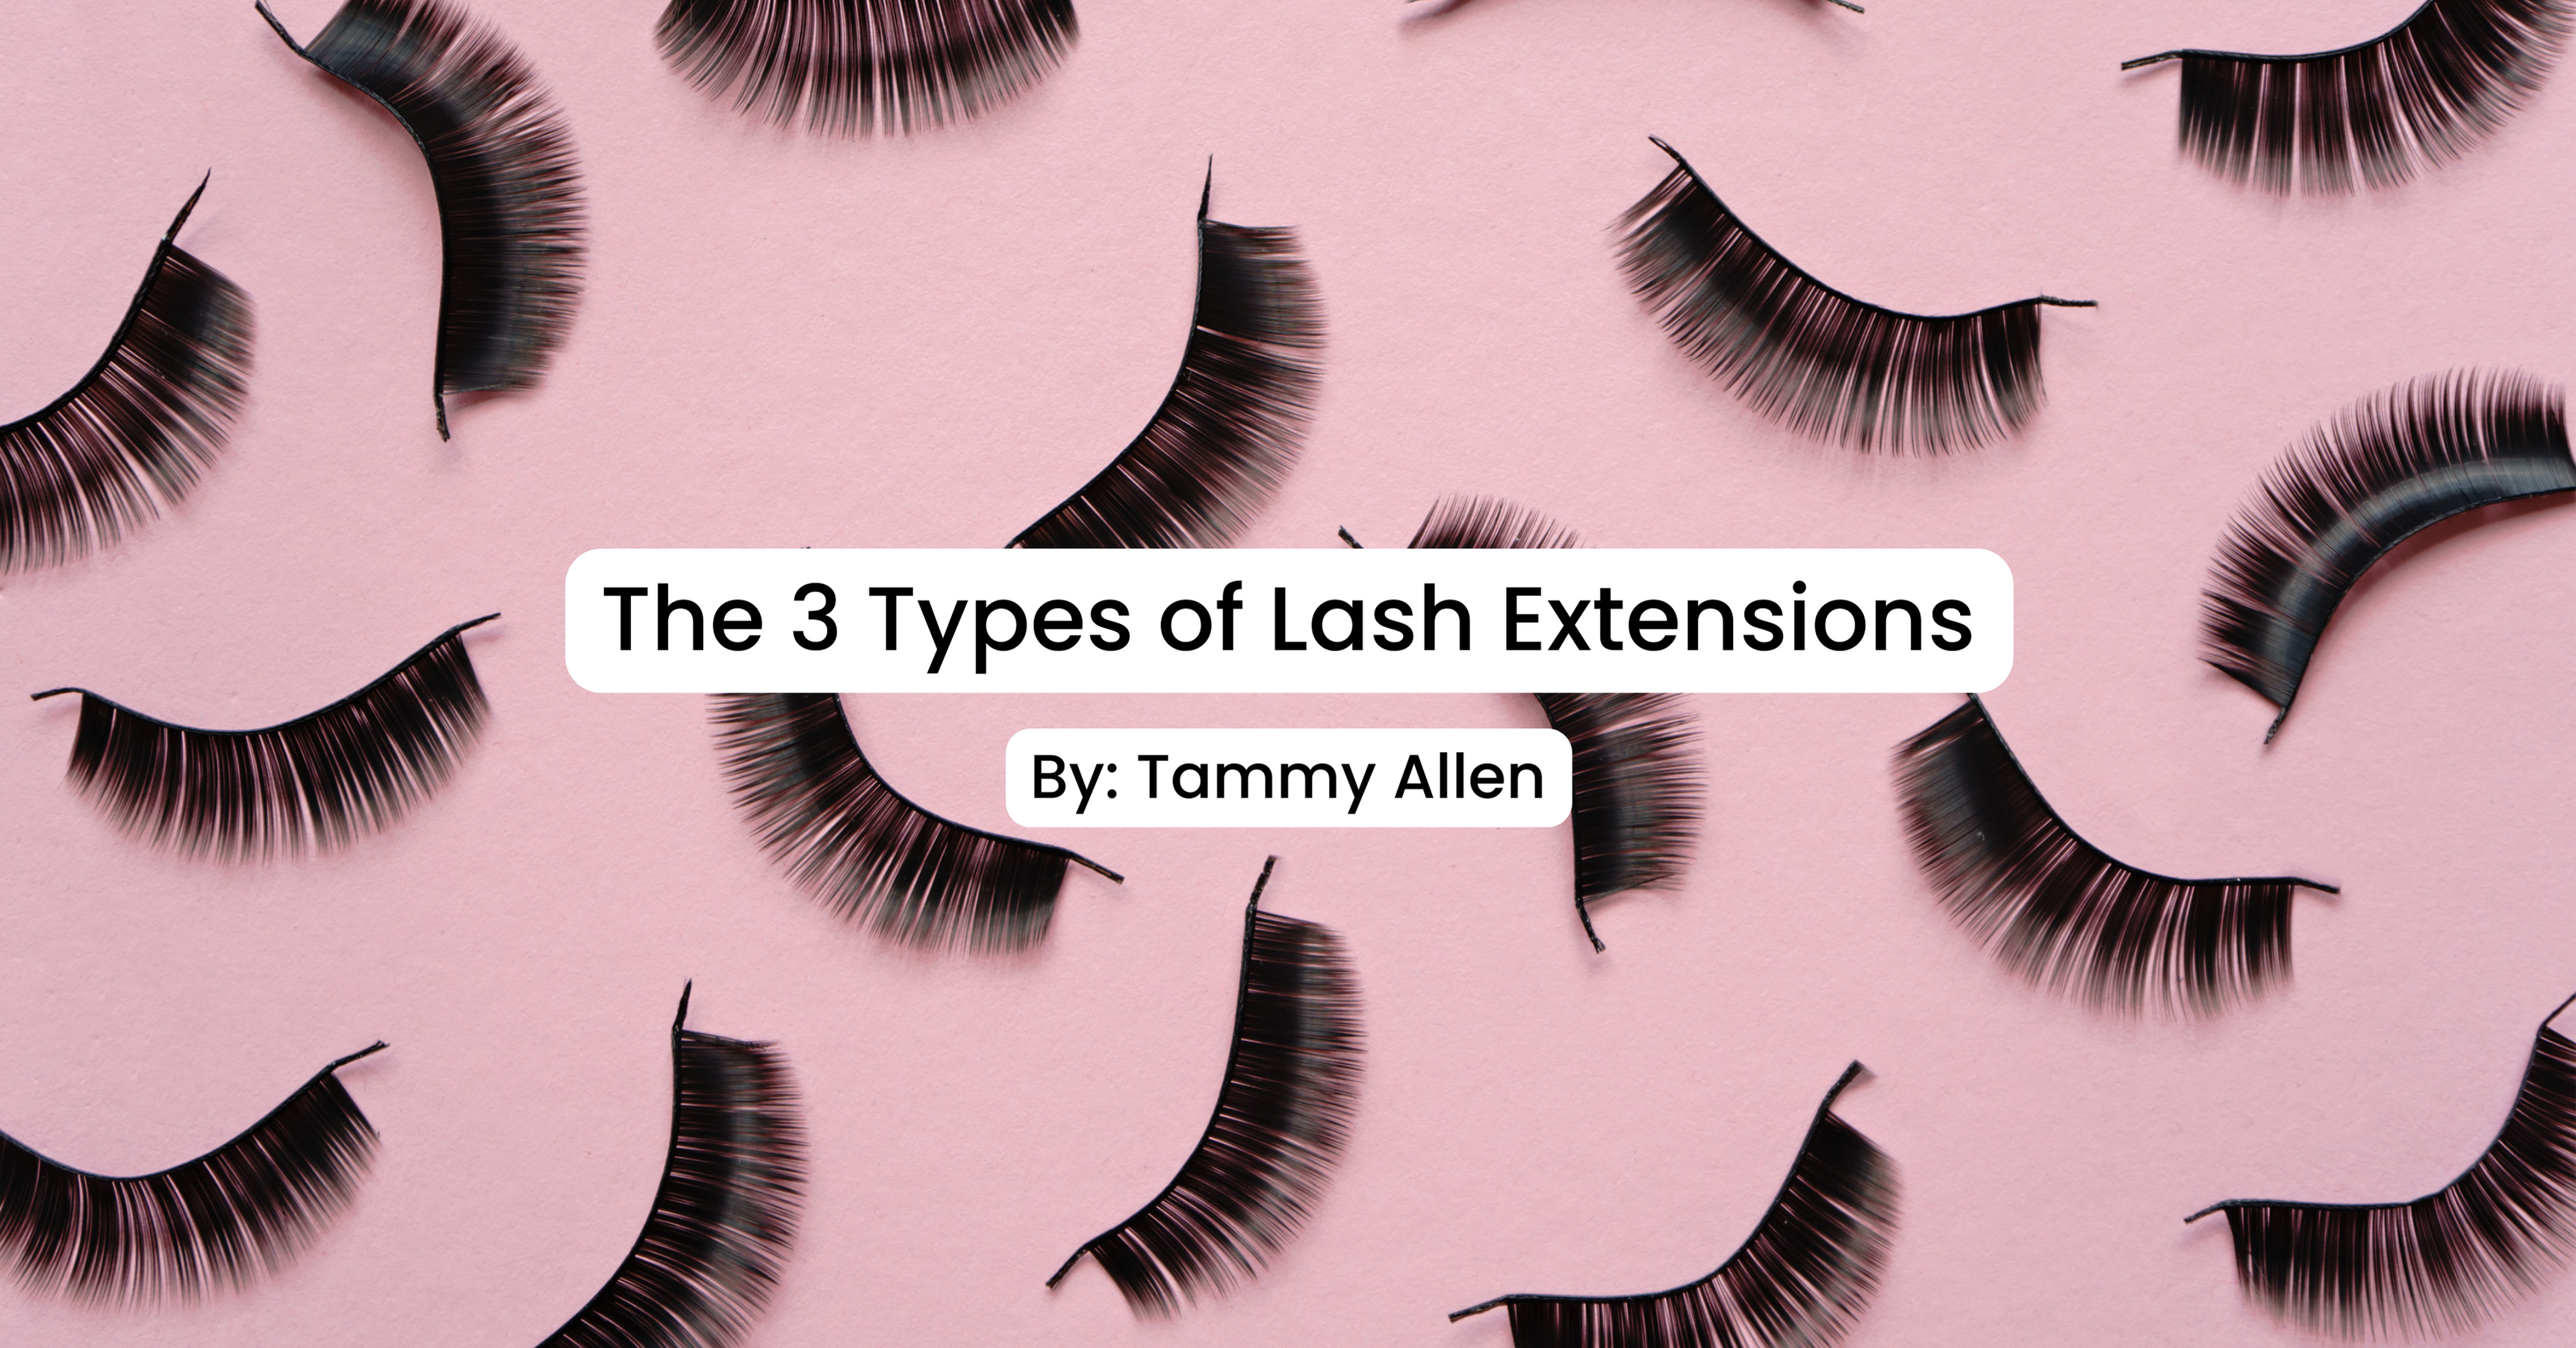 3 Types Of Lash Extensions cover image with eyelashes as a background